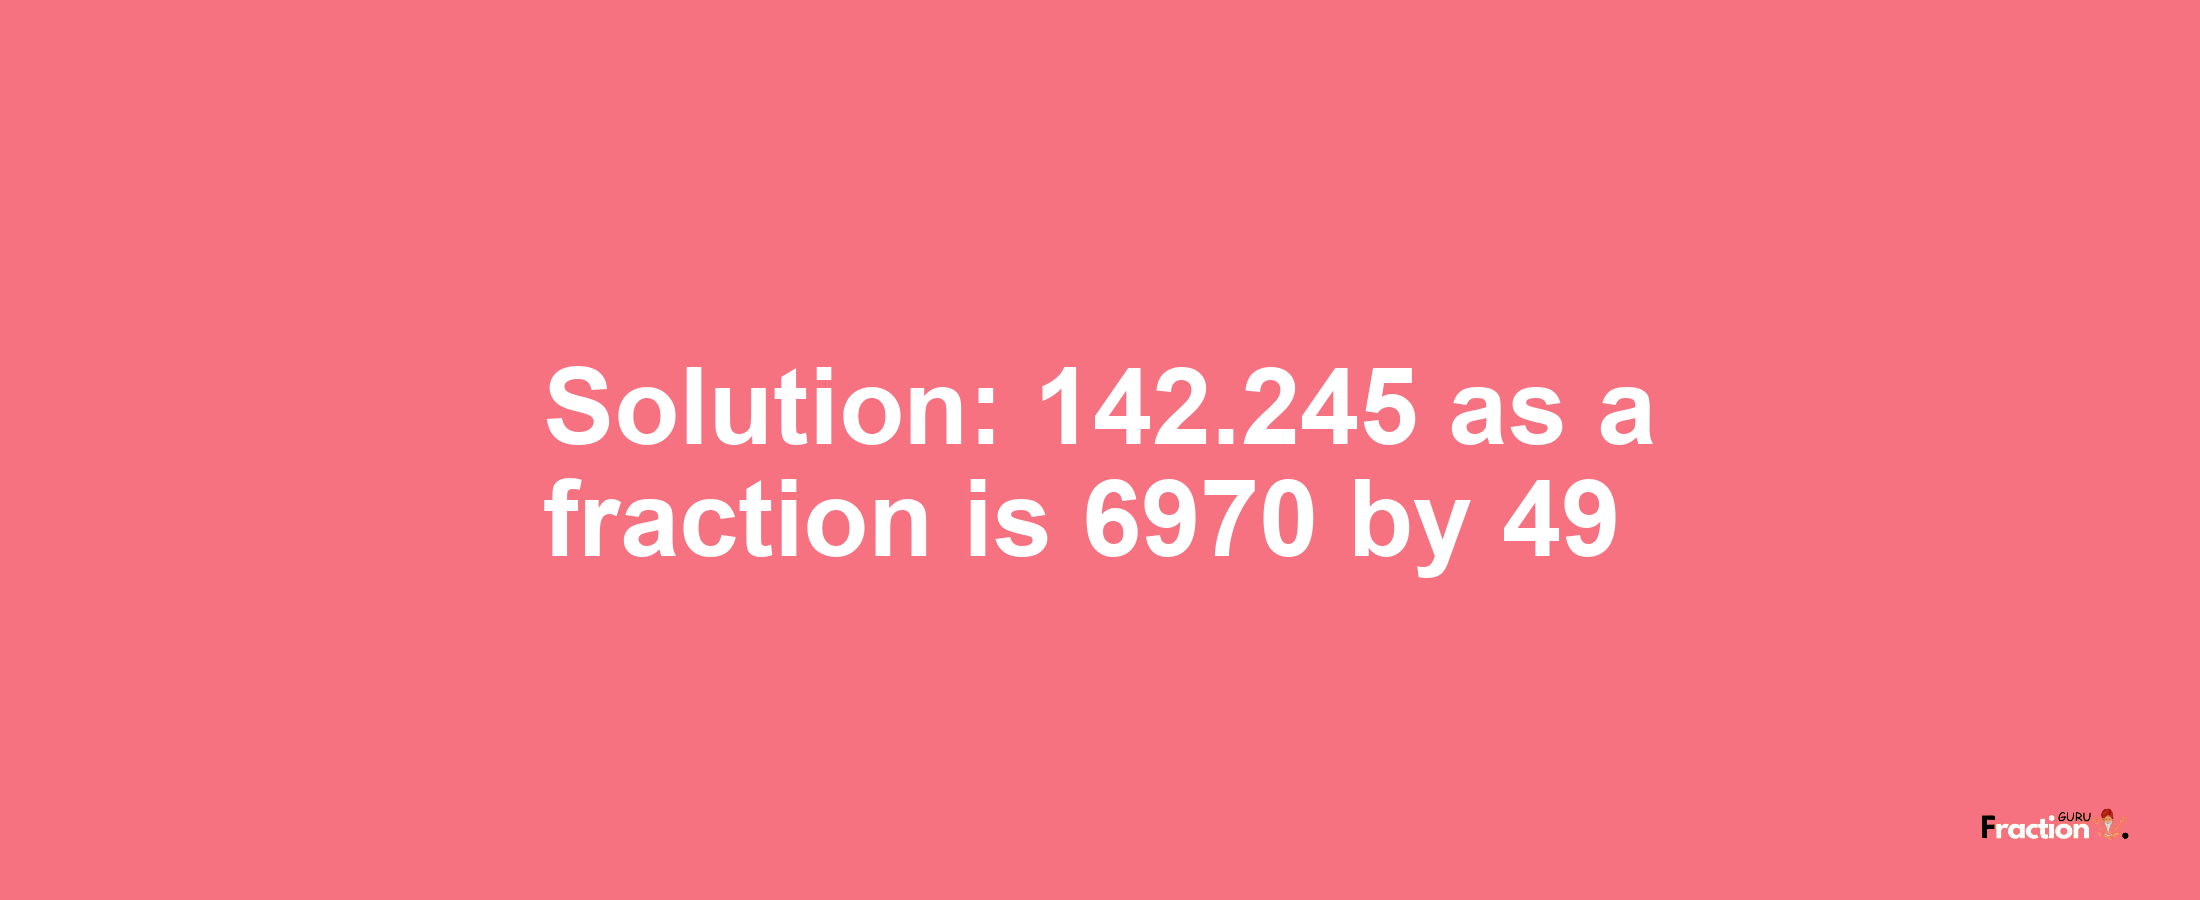 Solution:142.245 as a fraction is 6970/49